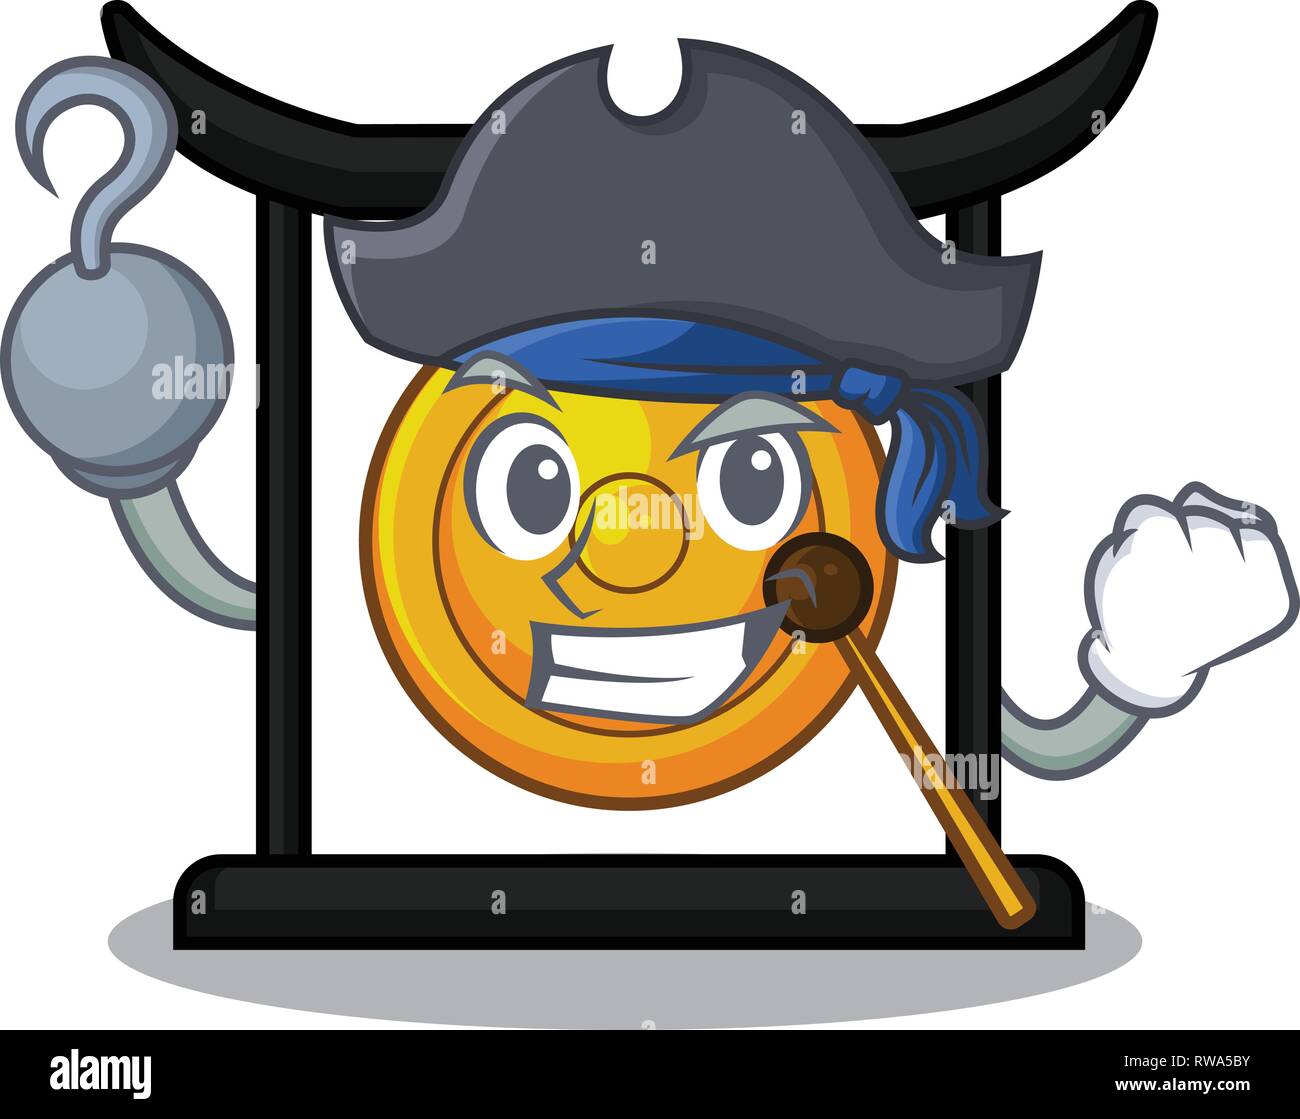 Pirate goldeng gong in the character shape Stock Vector